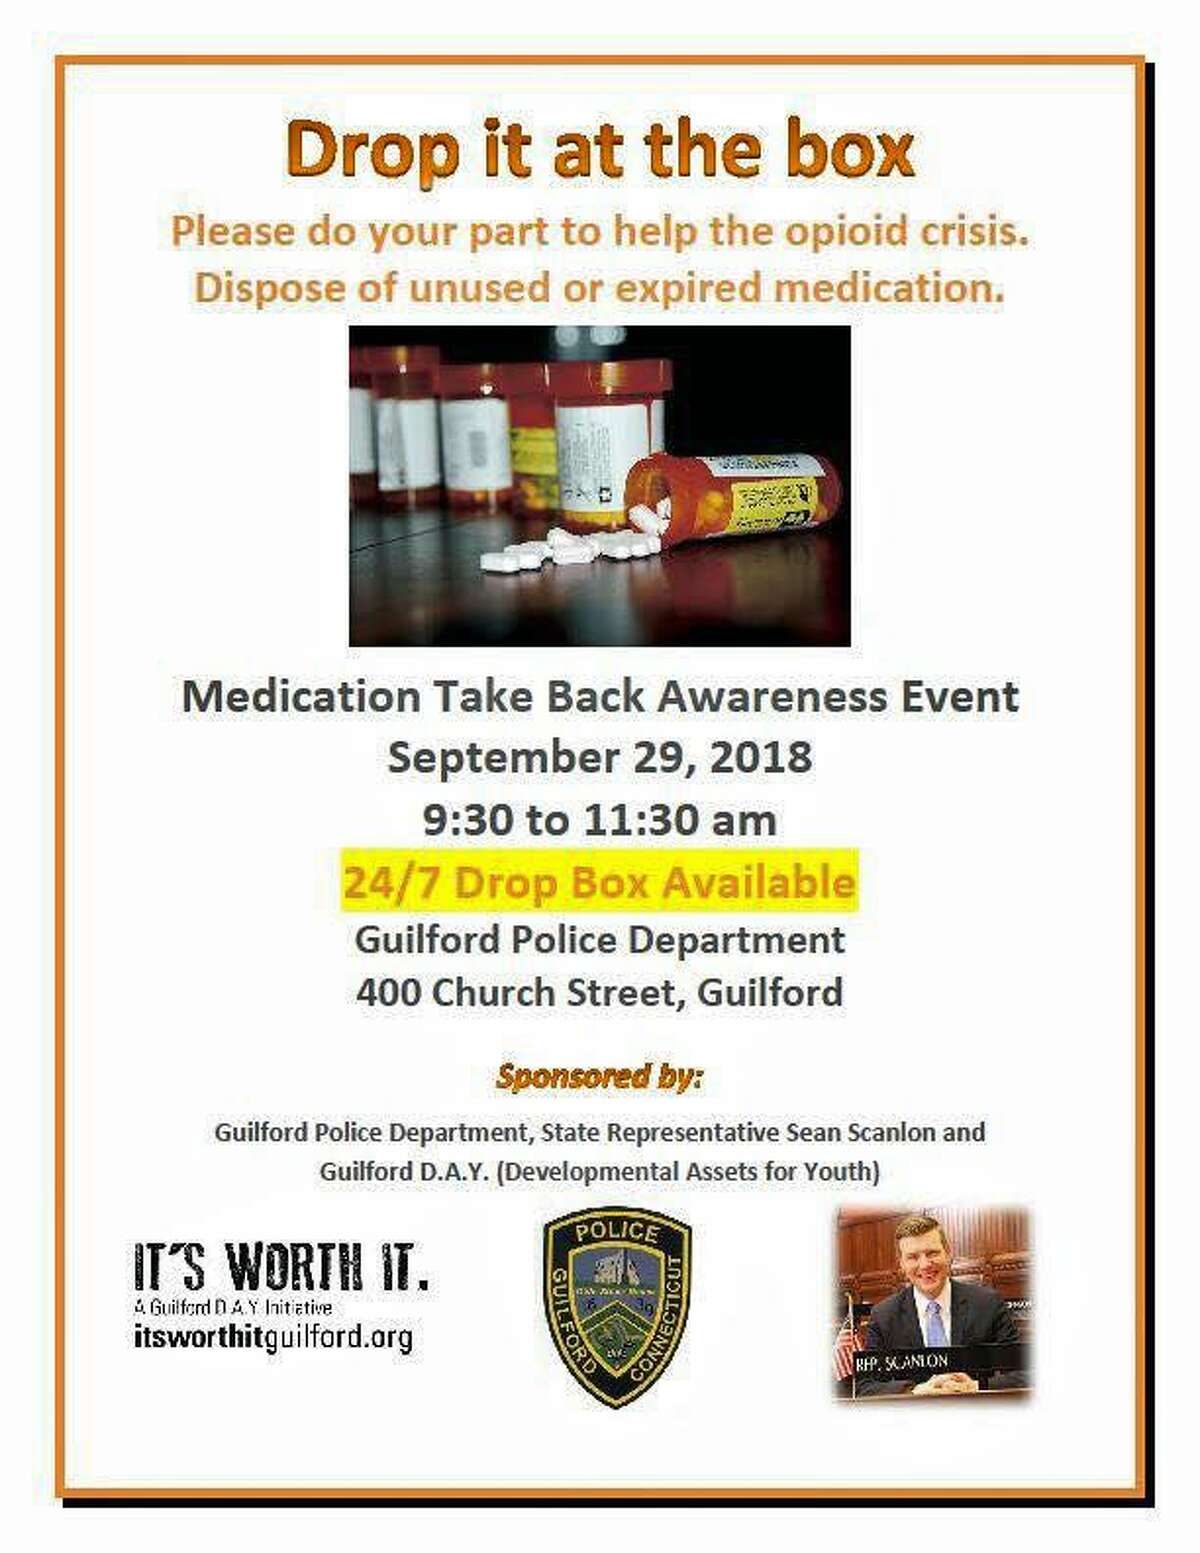 Did you miss Saturday's event? Pop over to the police department any time to drop off unused prescriptions.